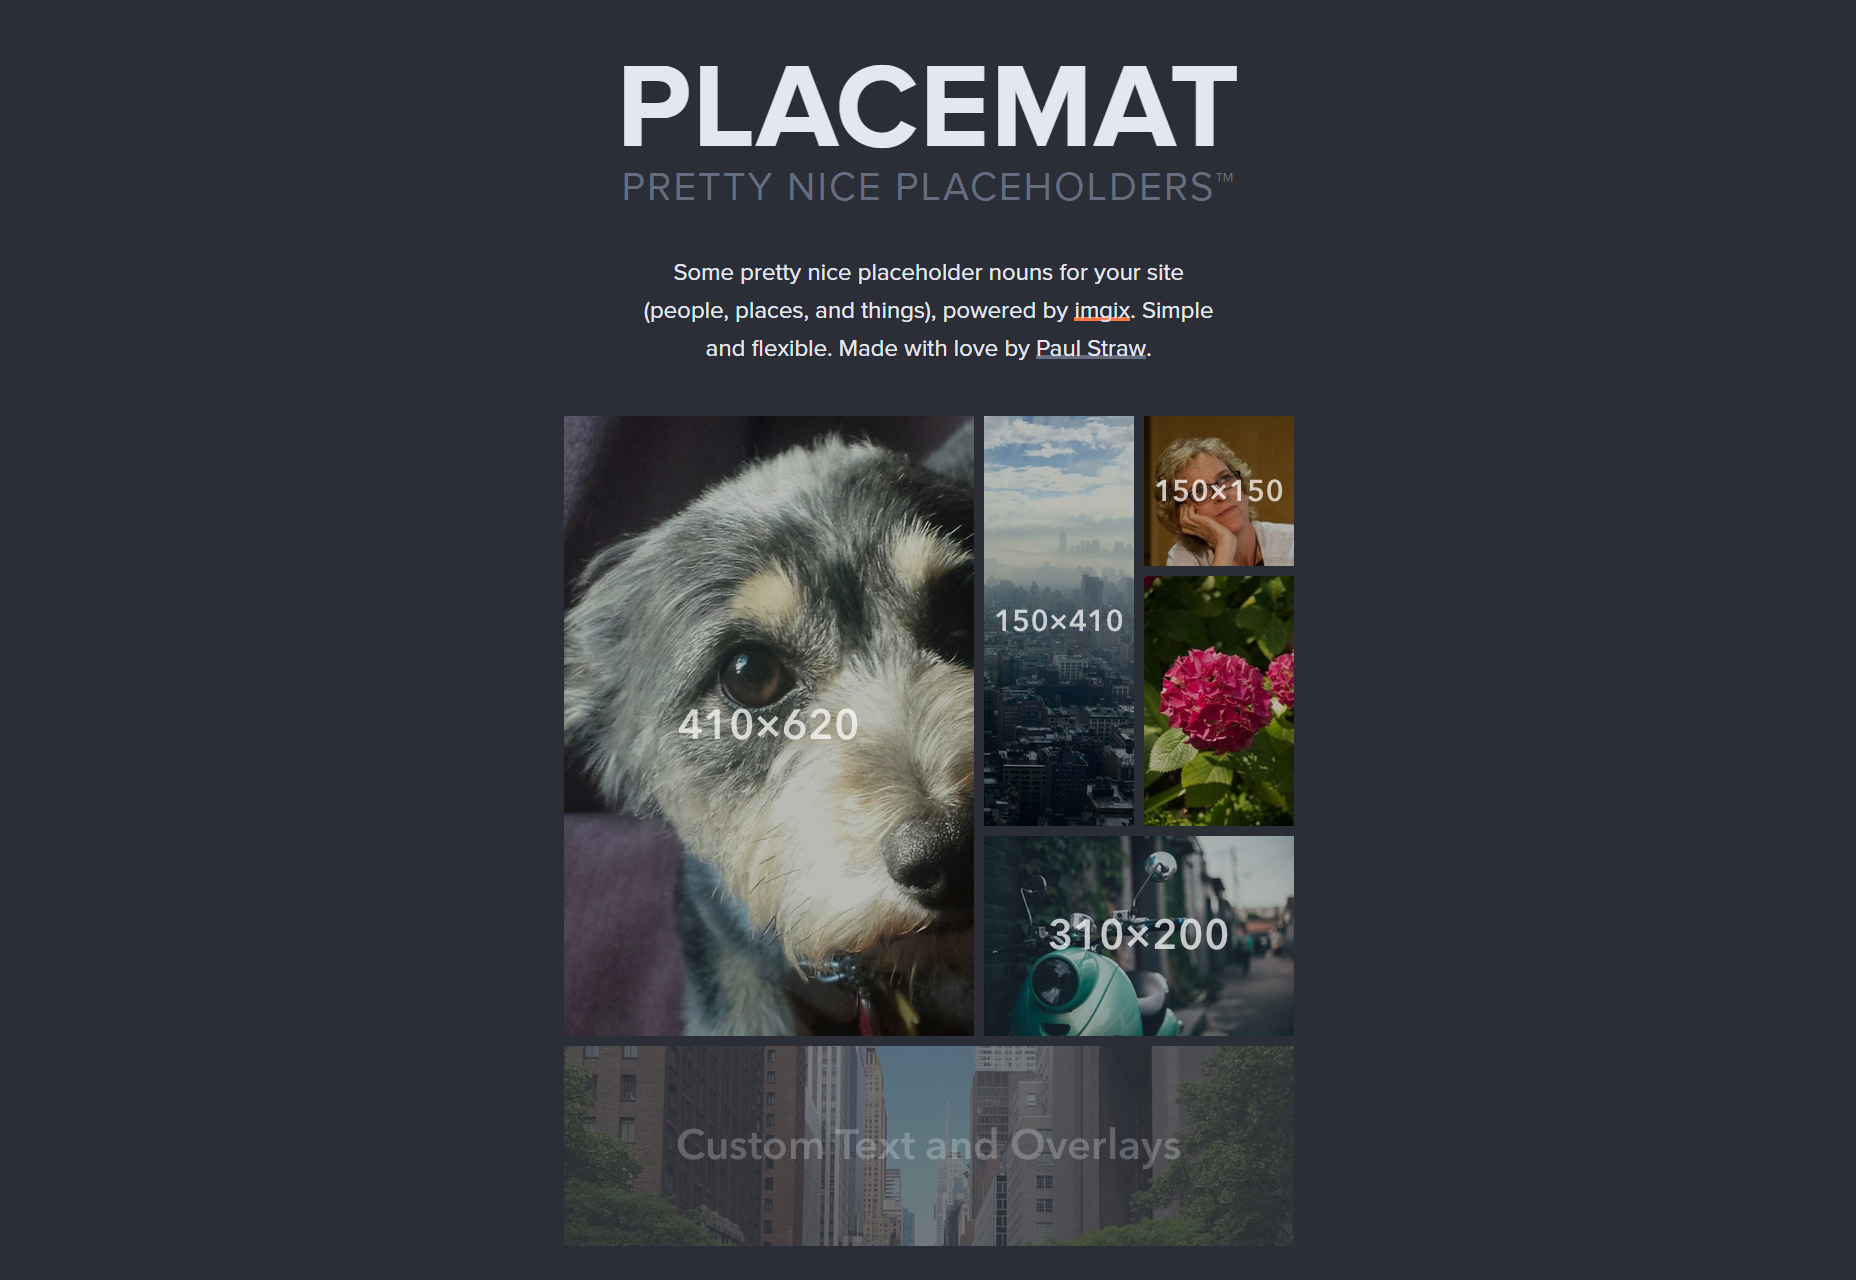 Placemat: Pretty URL Image Placeholders